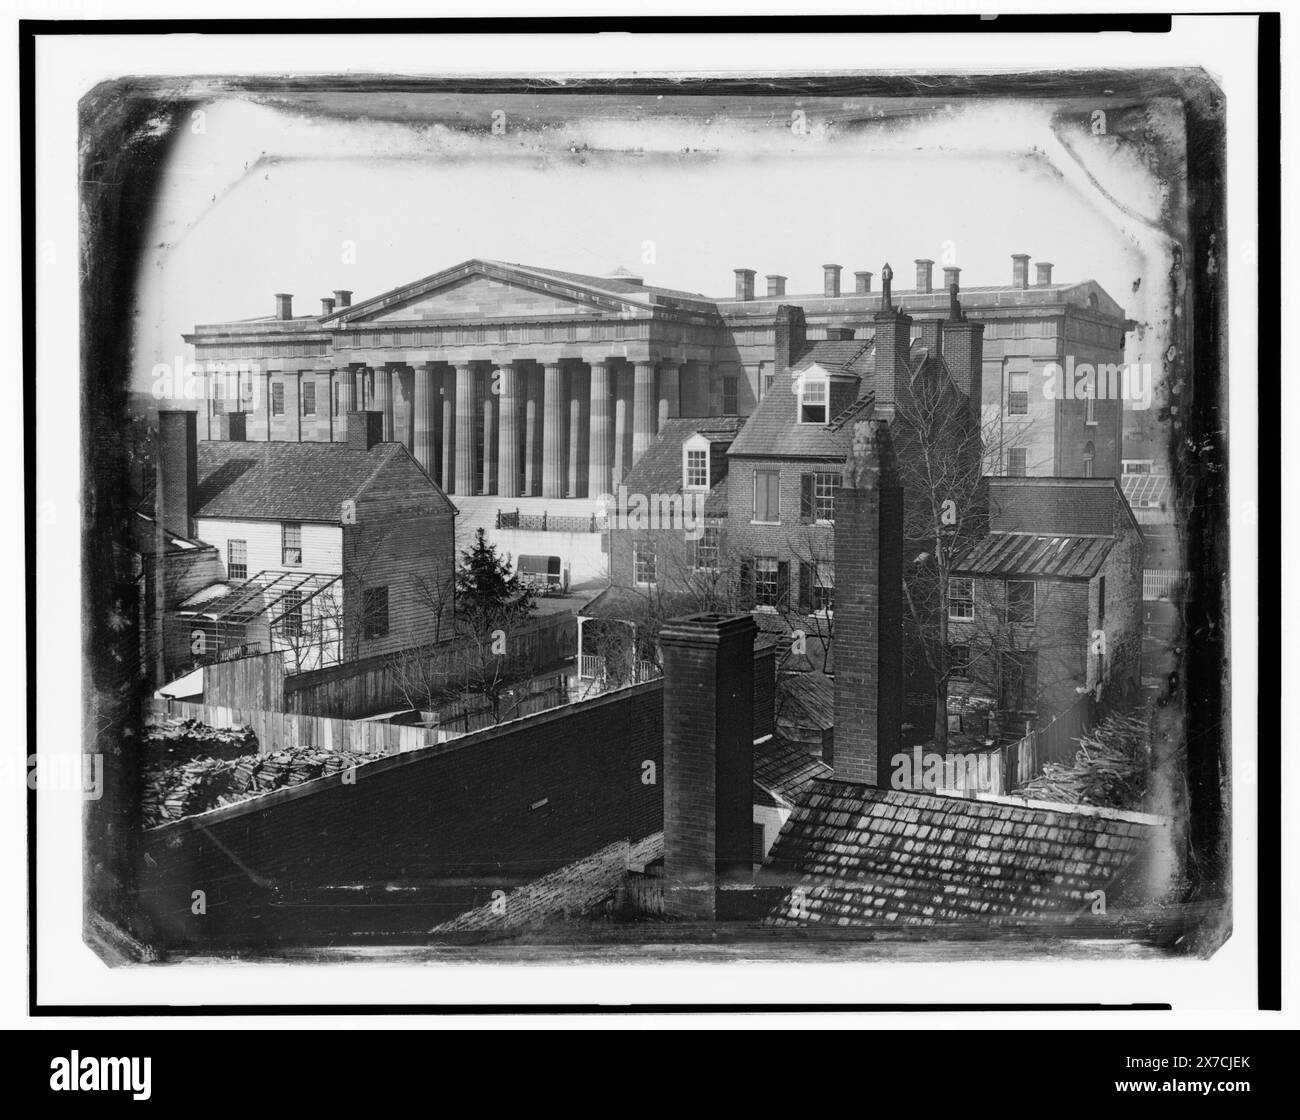 United States Patent Office, Washington, D.C., showing F Street facade, possibly taken from the upper floor of the General Post Office, Caption label from exhibit 'American Treasures Imagination': Early Views of Washington. Several government buildings were among the first edifices in the nation's capital to be recorded by the relatively new medium of photography. John Plumbe, Jr., the first professional photographer in Washington, D.C., operated a studio in the mid-1840s. He recorded the U.S. Patent Office, which now houses the Smithsonian's National Portrait Gallery and National Museum of Am Stock Photo